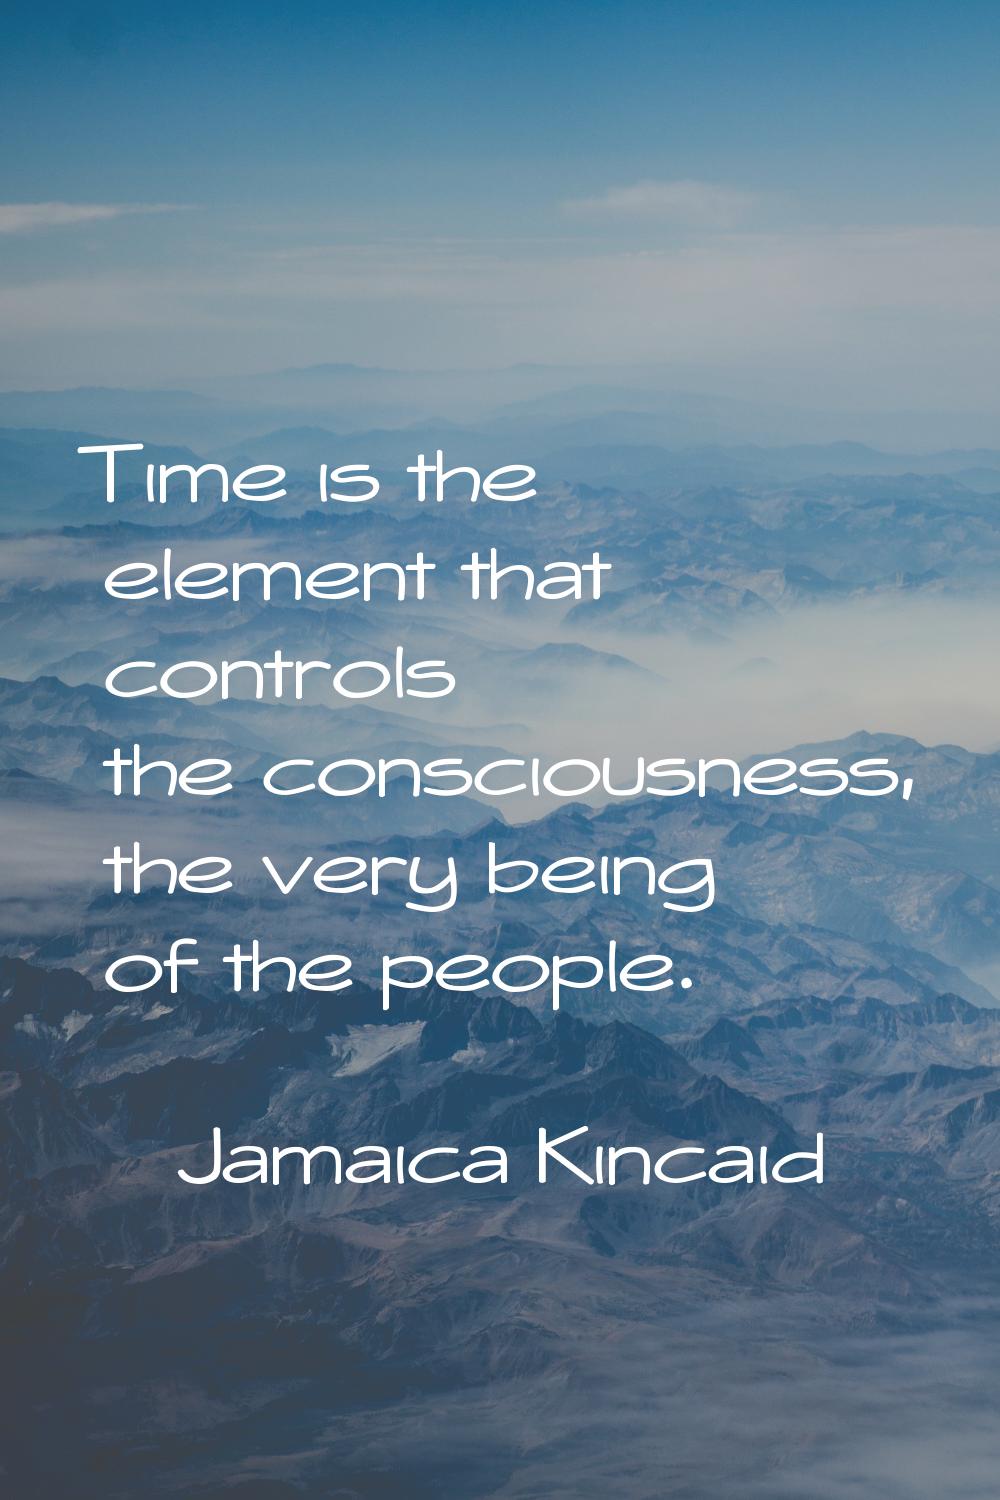 Time is the element that controls the consciousness, the very being of the people.